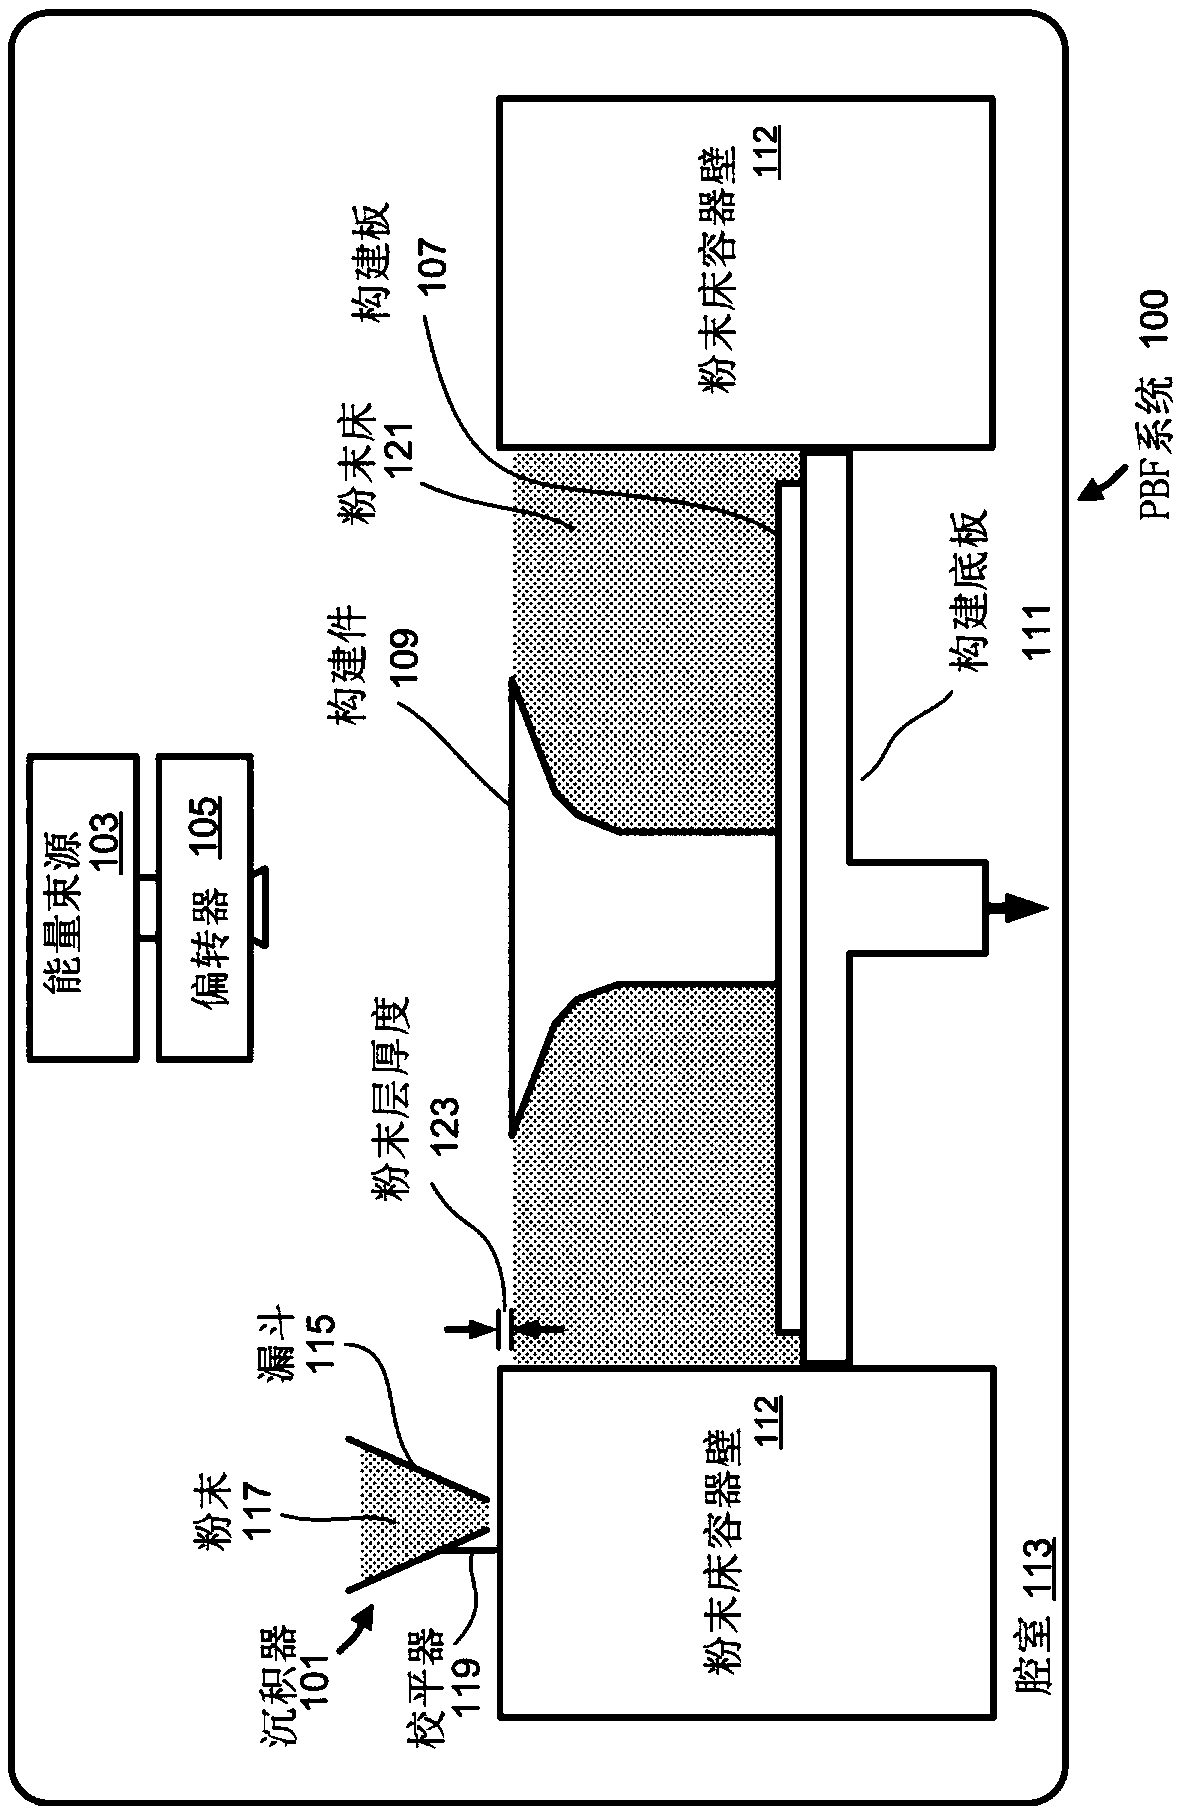 Systems and methods for additive manufacturing of transport structures